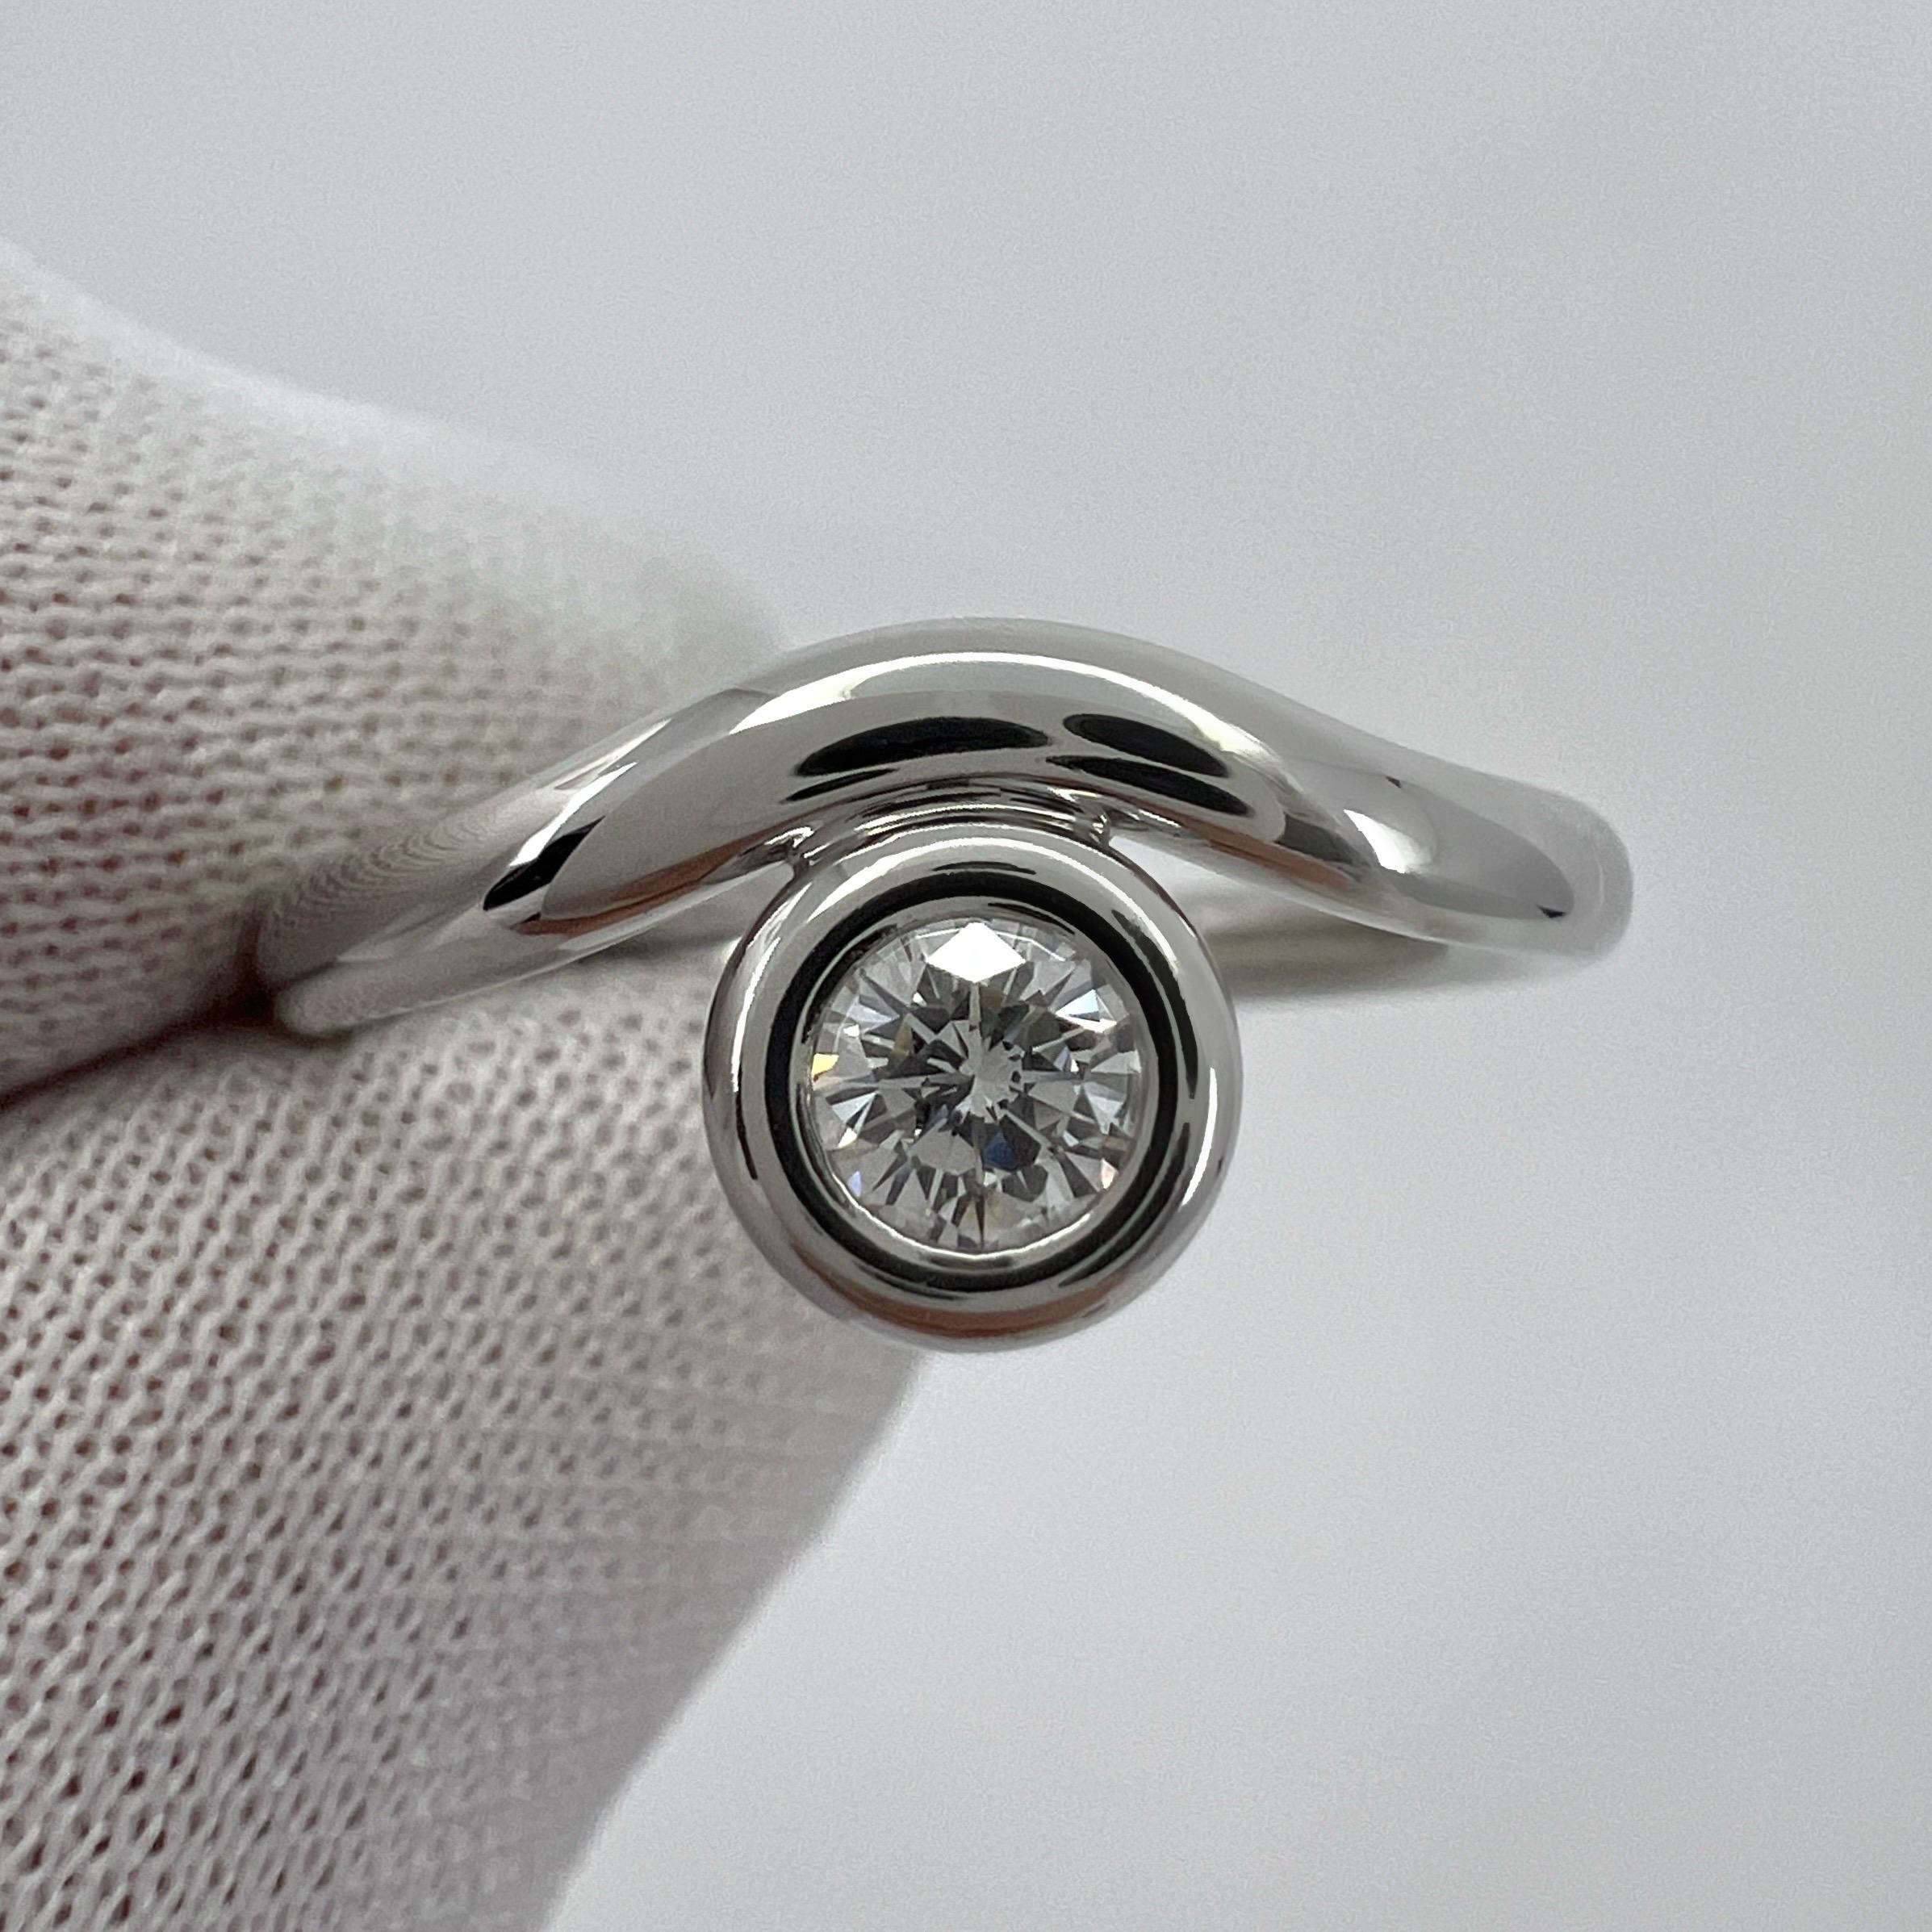 Vintage Tiffany & Co. Round Cut Diamond By The Yard 950 Platinum Solitaire Ring For Sale 8